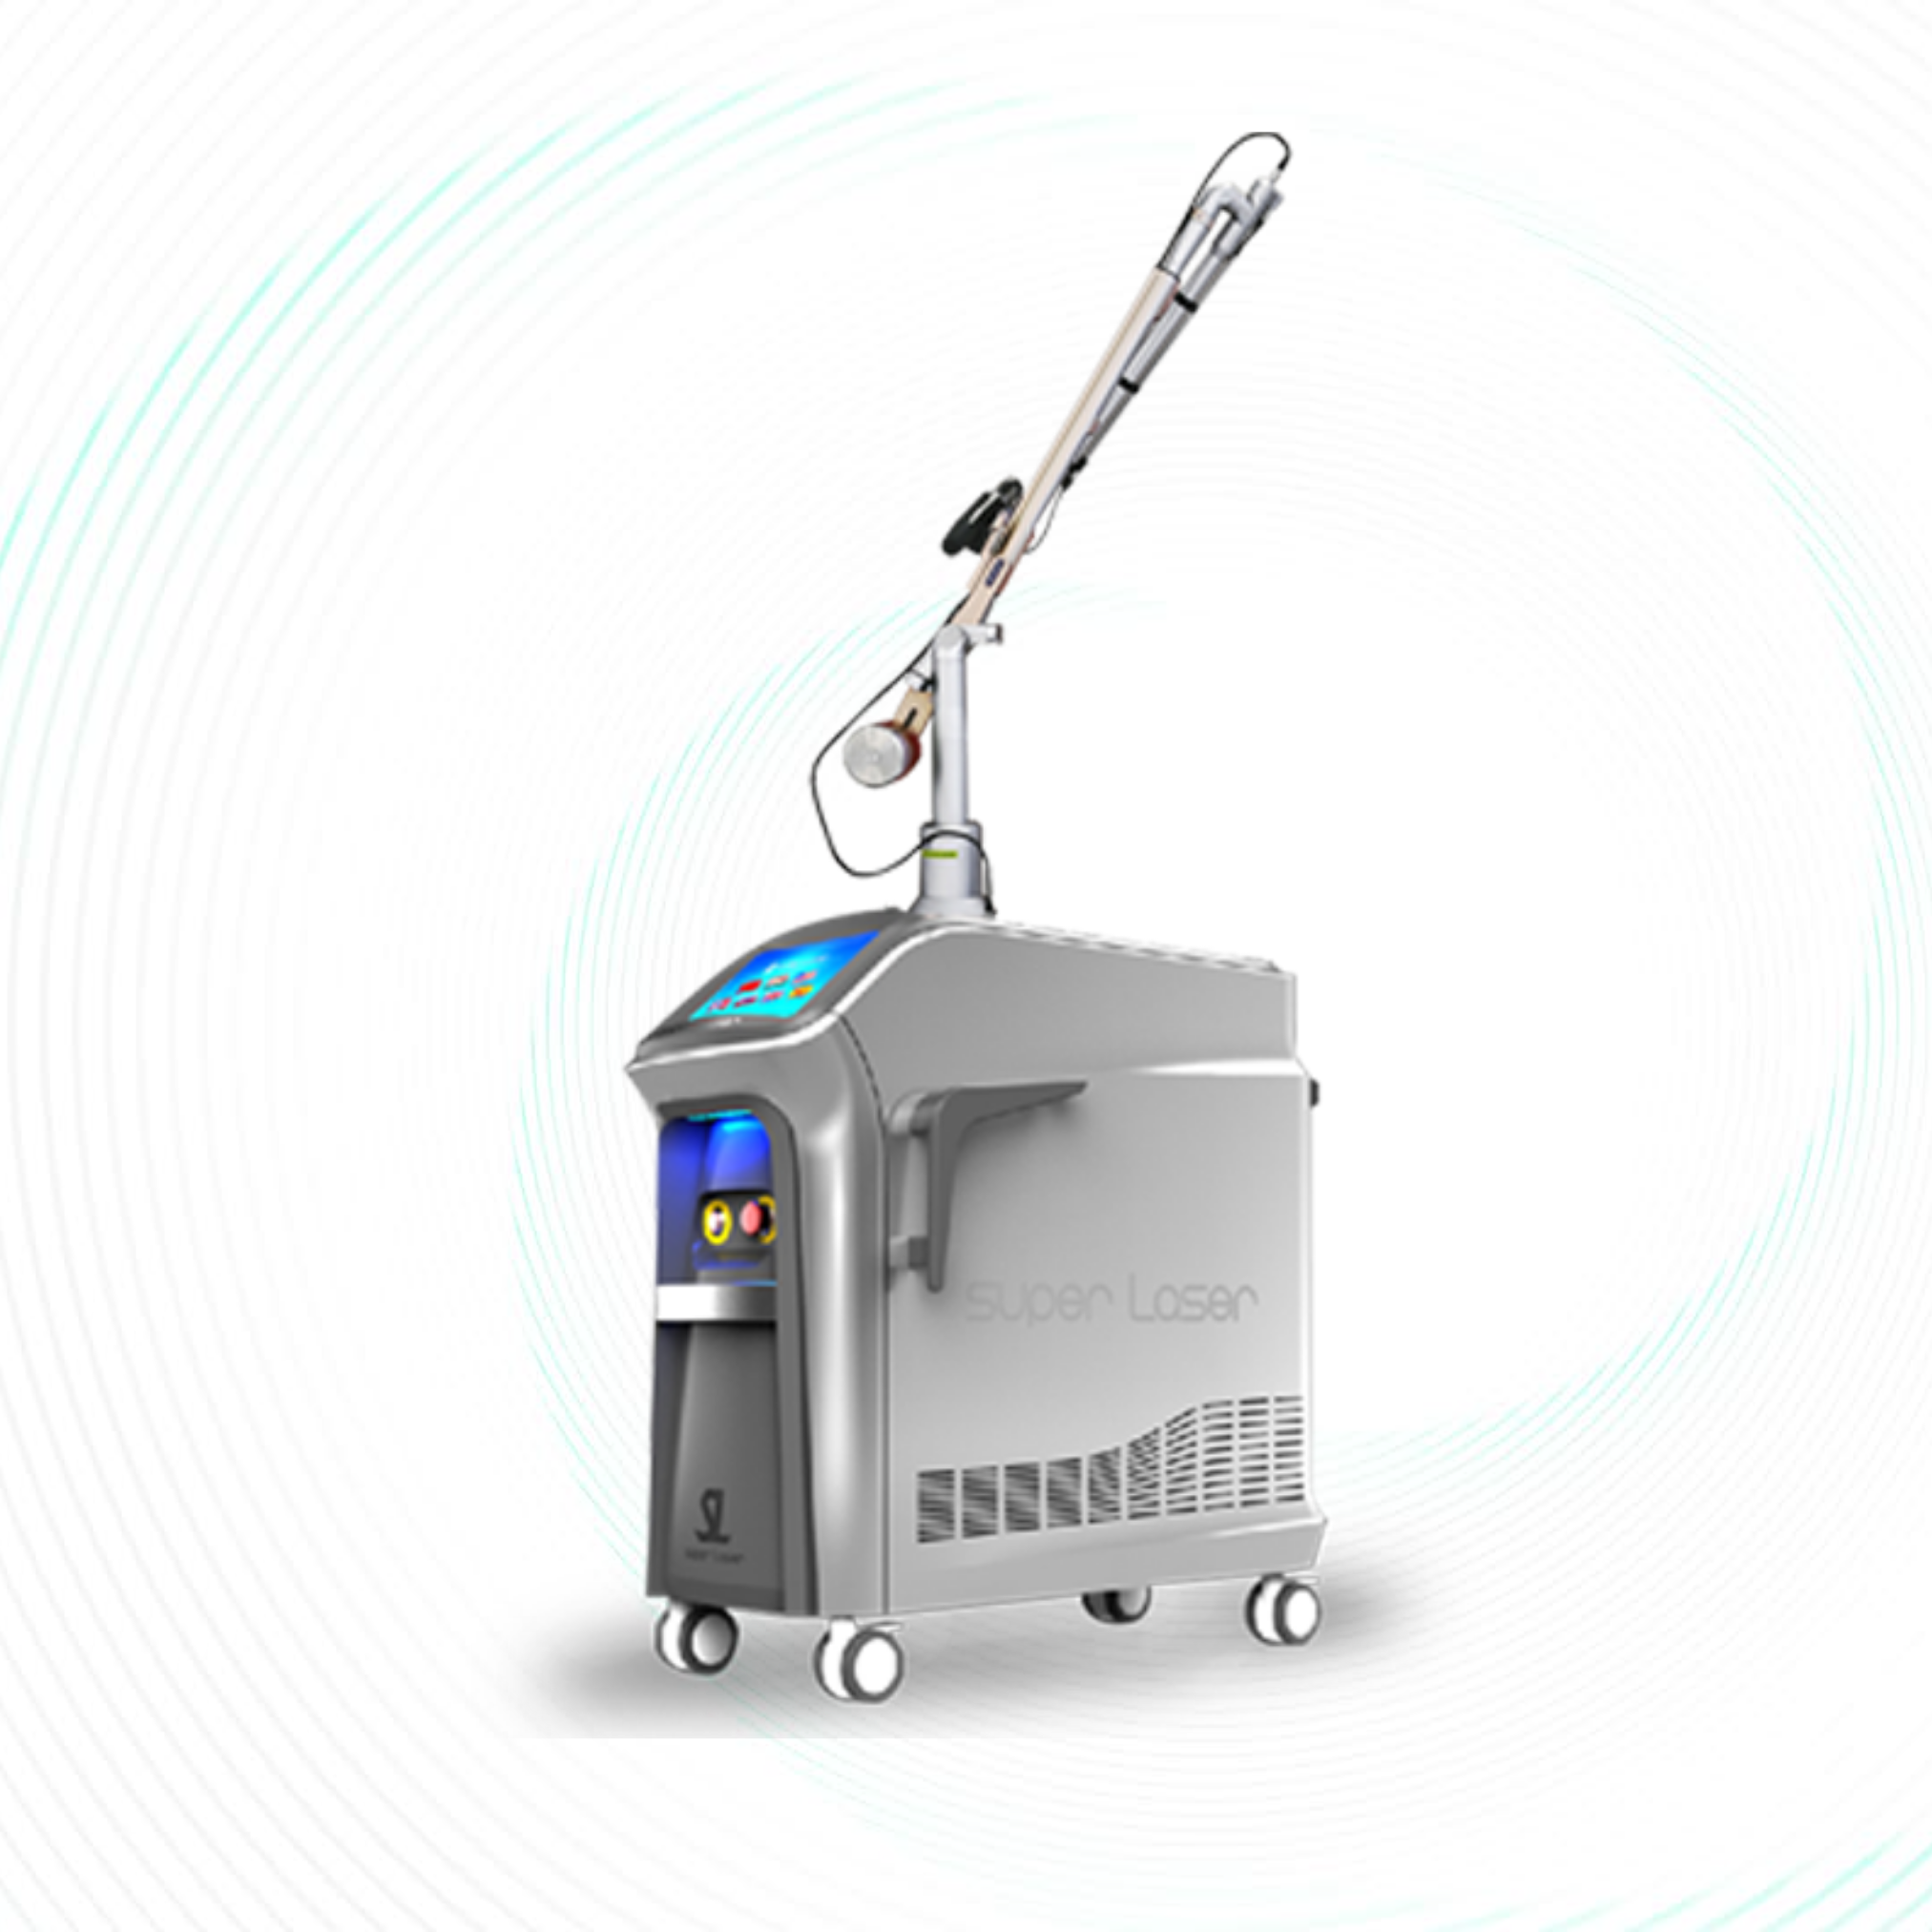 Your Next Laser Tattoo Removal Machine | 3D Aesthetics